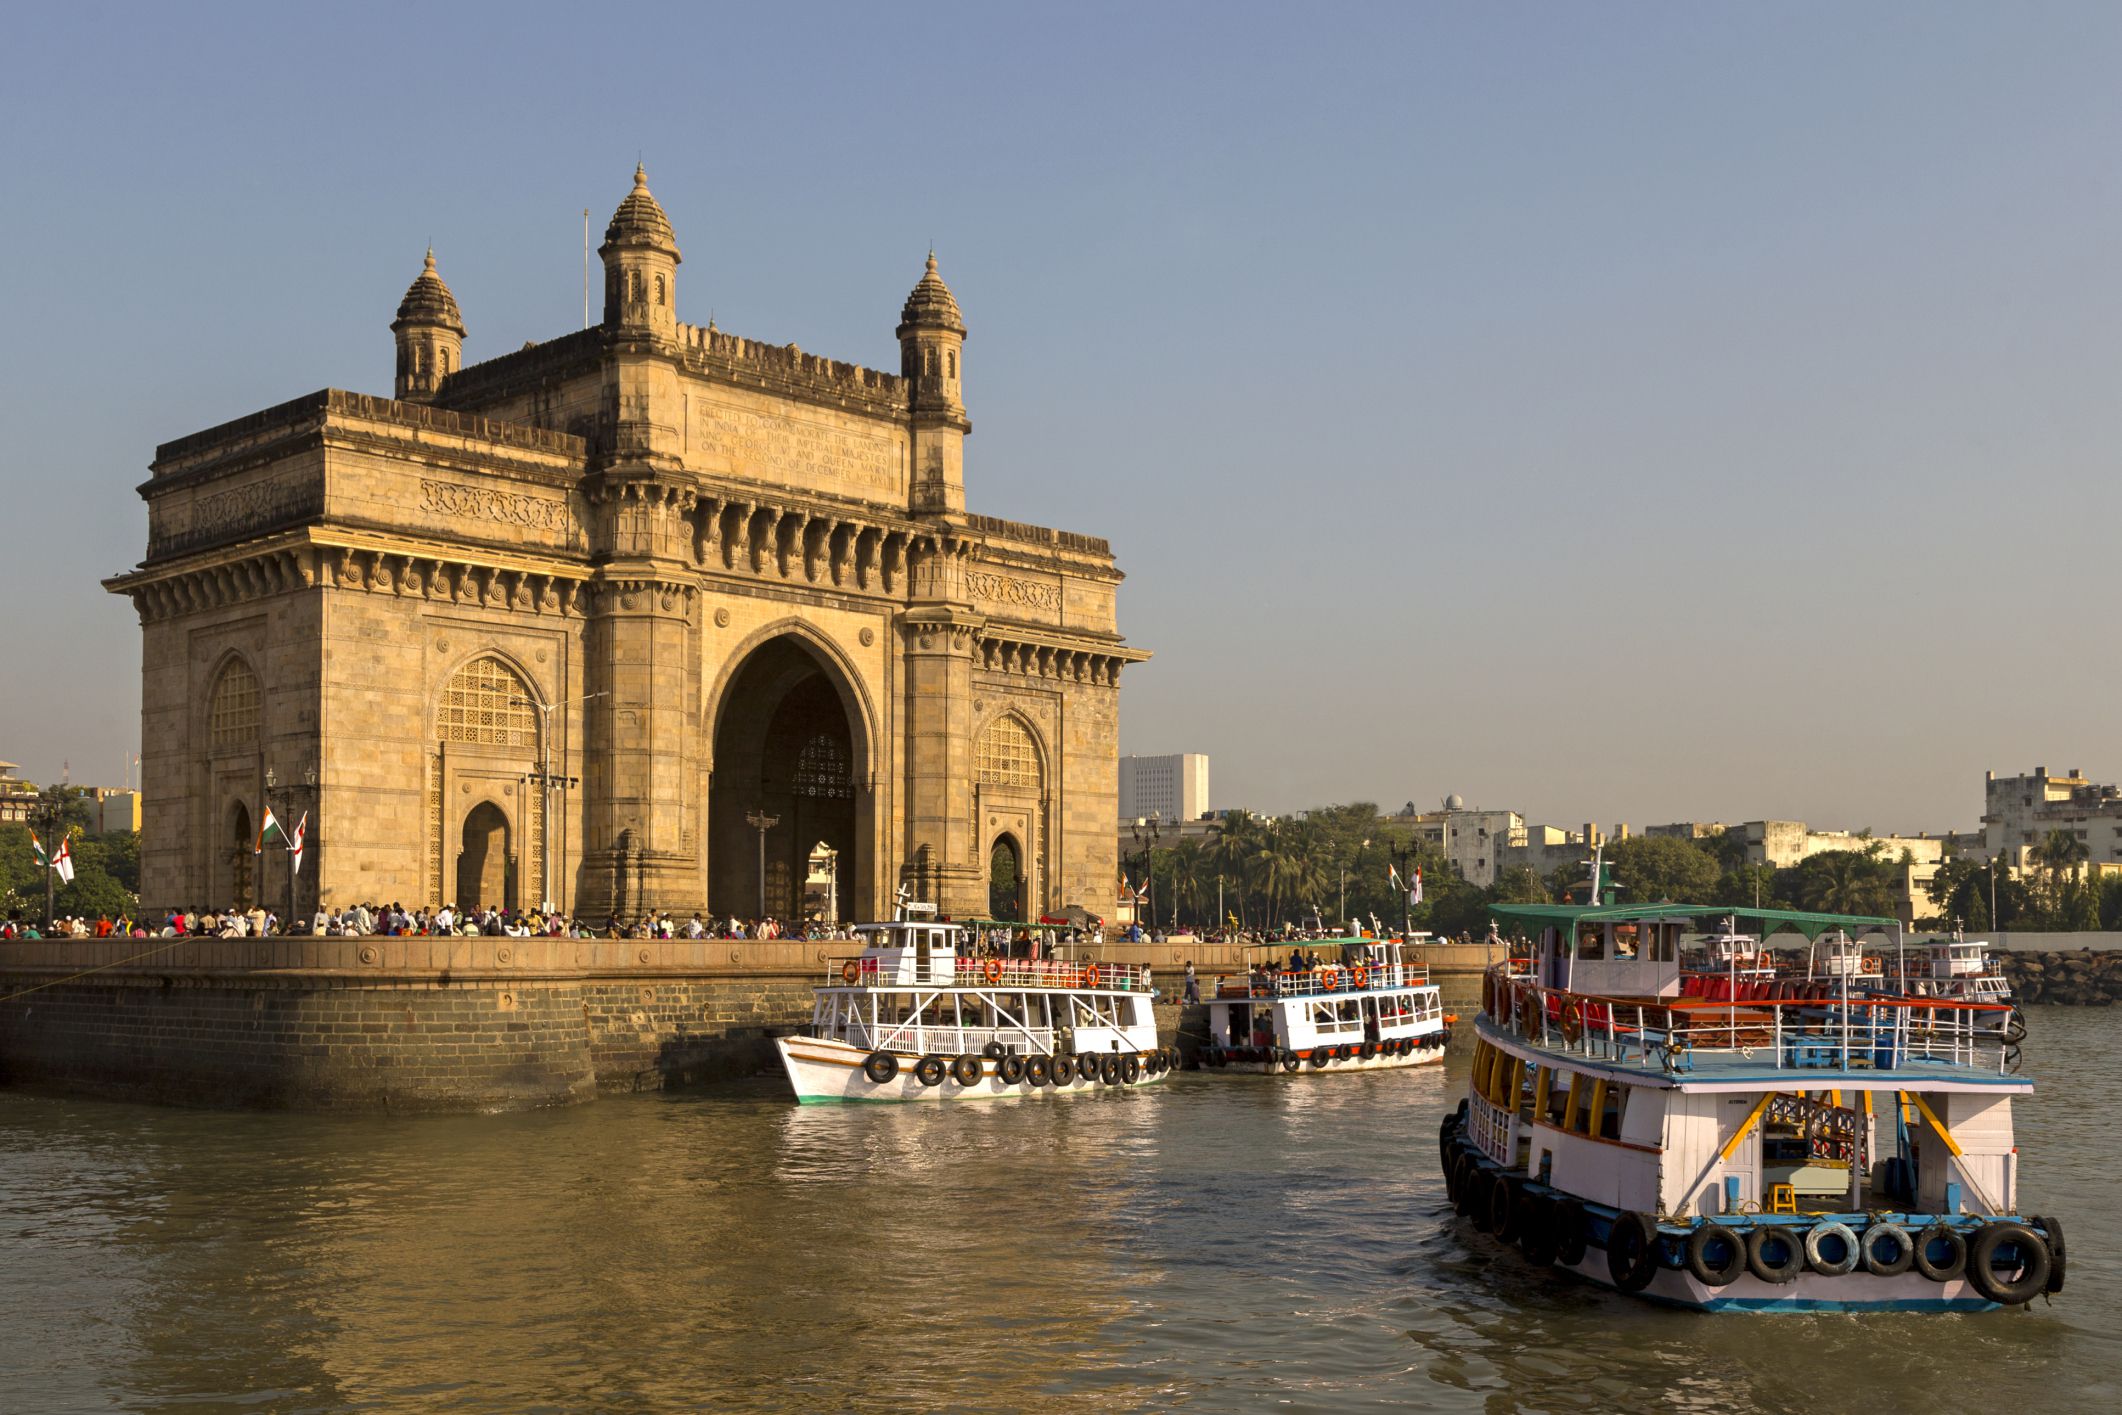 Mumbai Information and City Guide to Plan Your Trip